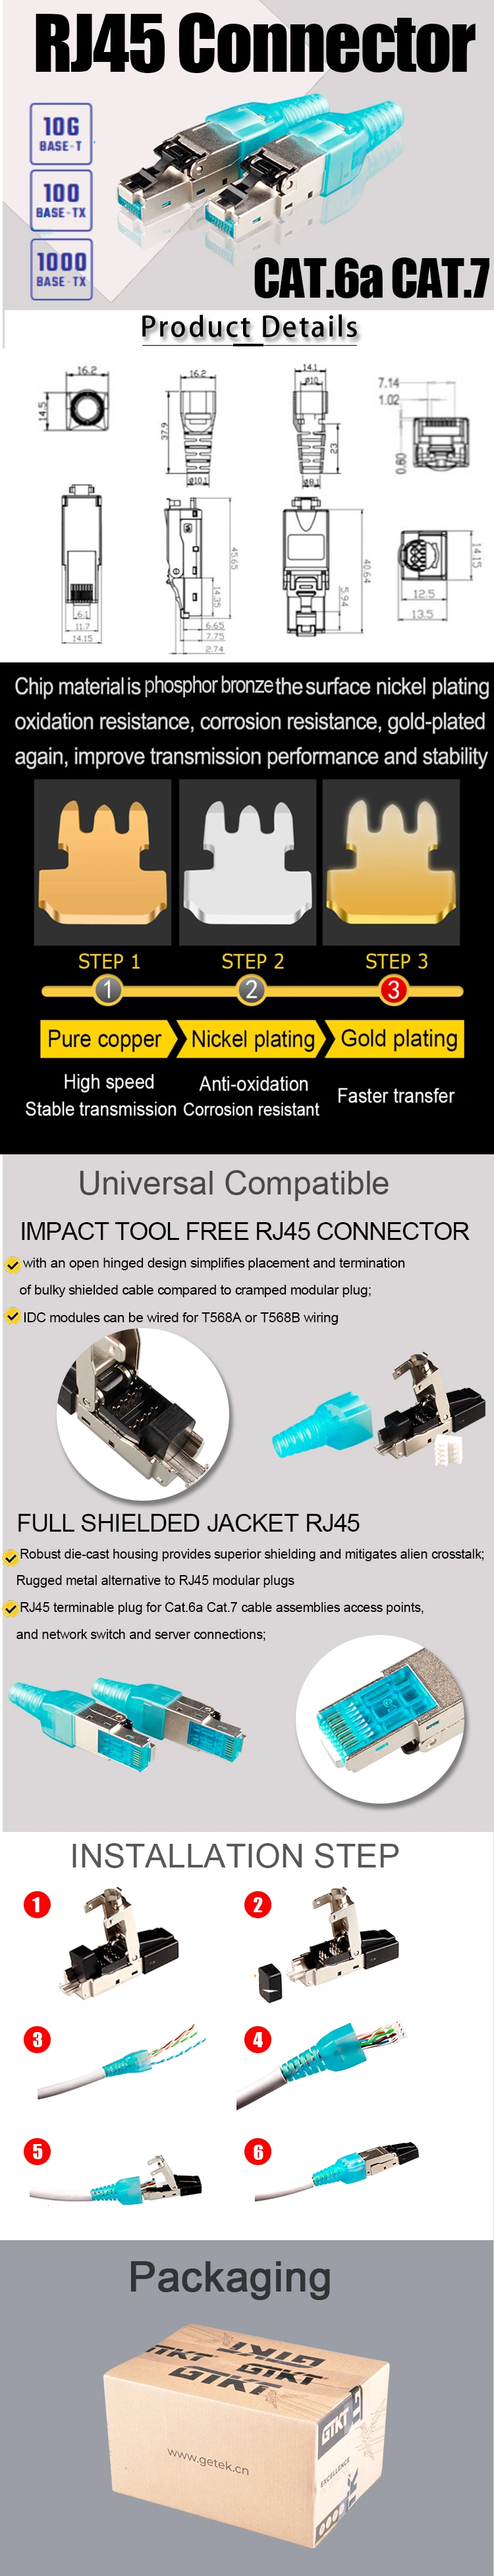 Gcabling Network Plug FTP Toolless CAT6 CAT6A Cat7 RJ45 Ethernet Connector CAT6 CAT6A Shield 8p8c Toolless Connected Plug